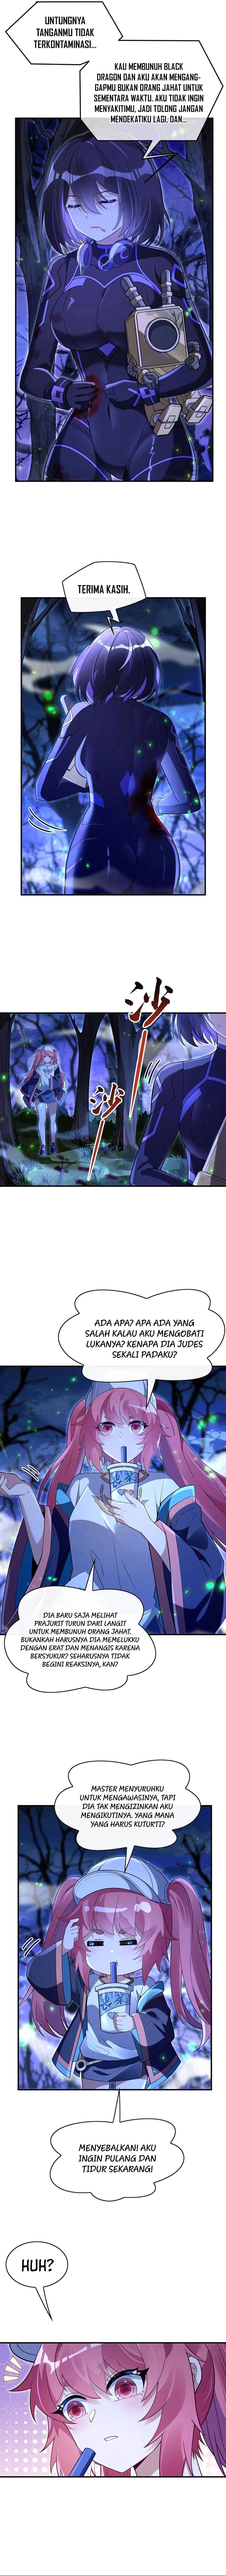 Dilarang COPAS - situs resmi www.mangacanblog.com - Komik my female apprentices are all big shots from the future 259 - chapter 259 260 Indonesia my female apprentices are all big shots from the future 259 - chapter 259 Terbaru 3|Baca Manga Komik Indonesia|Mangacan